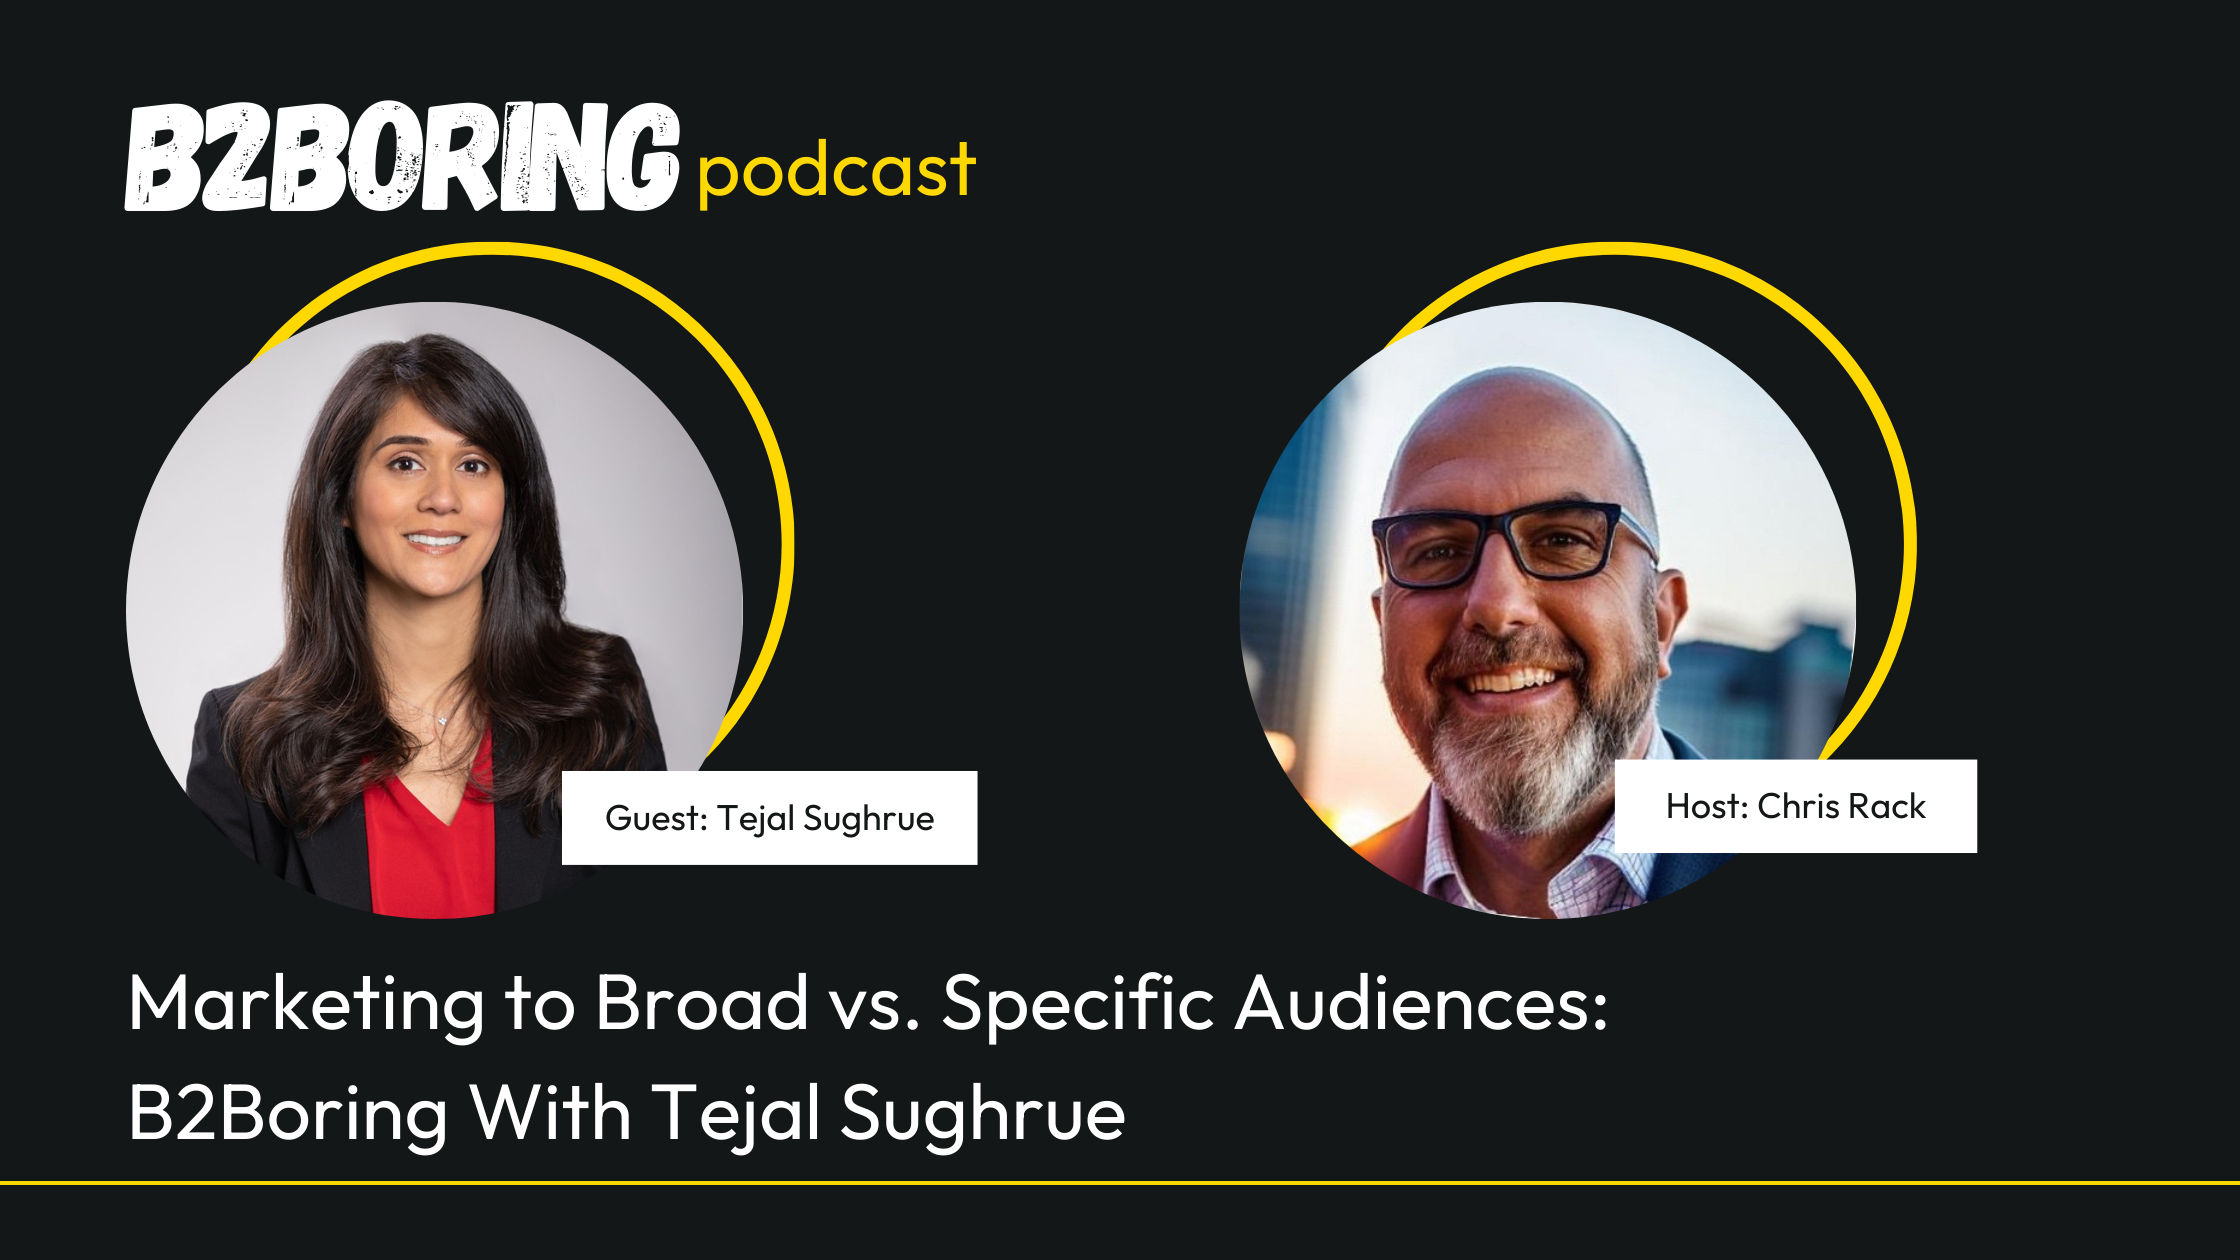 B2Boring Podcast featured image dark background focusing on guest speaker Tejal Sughrue